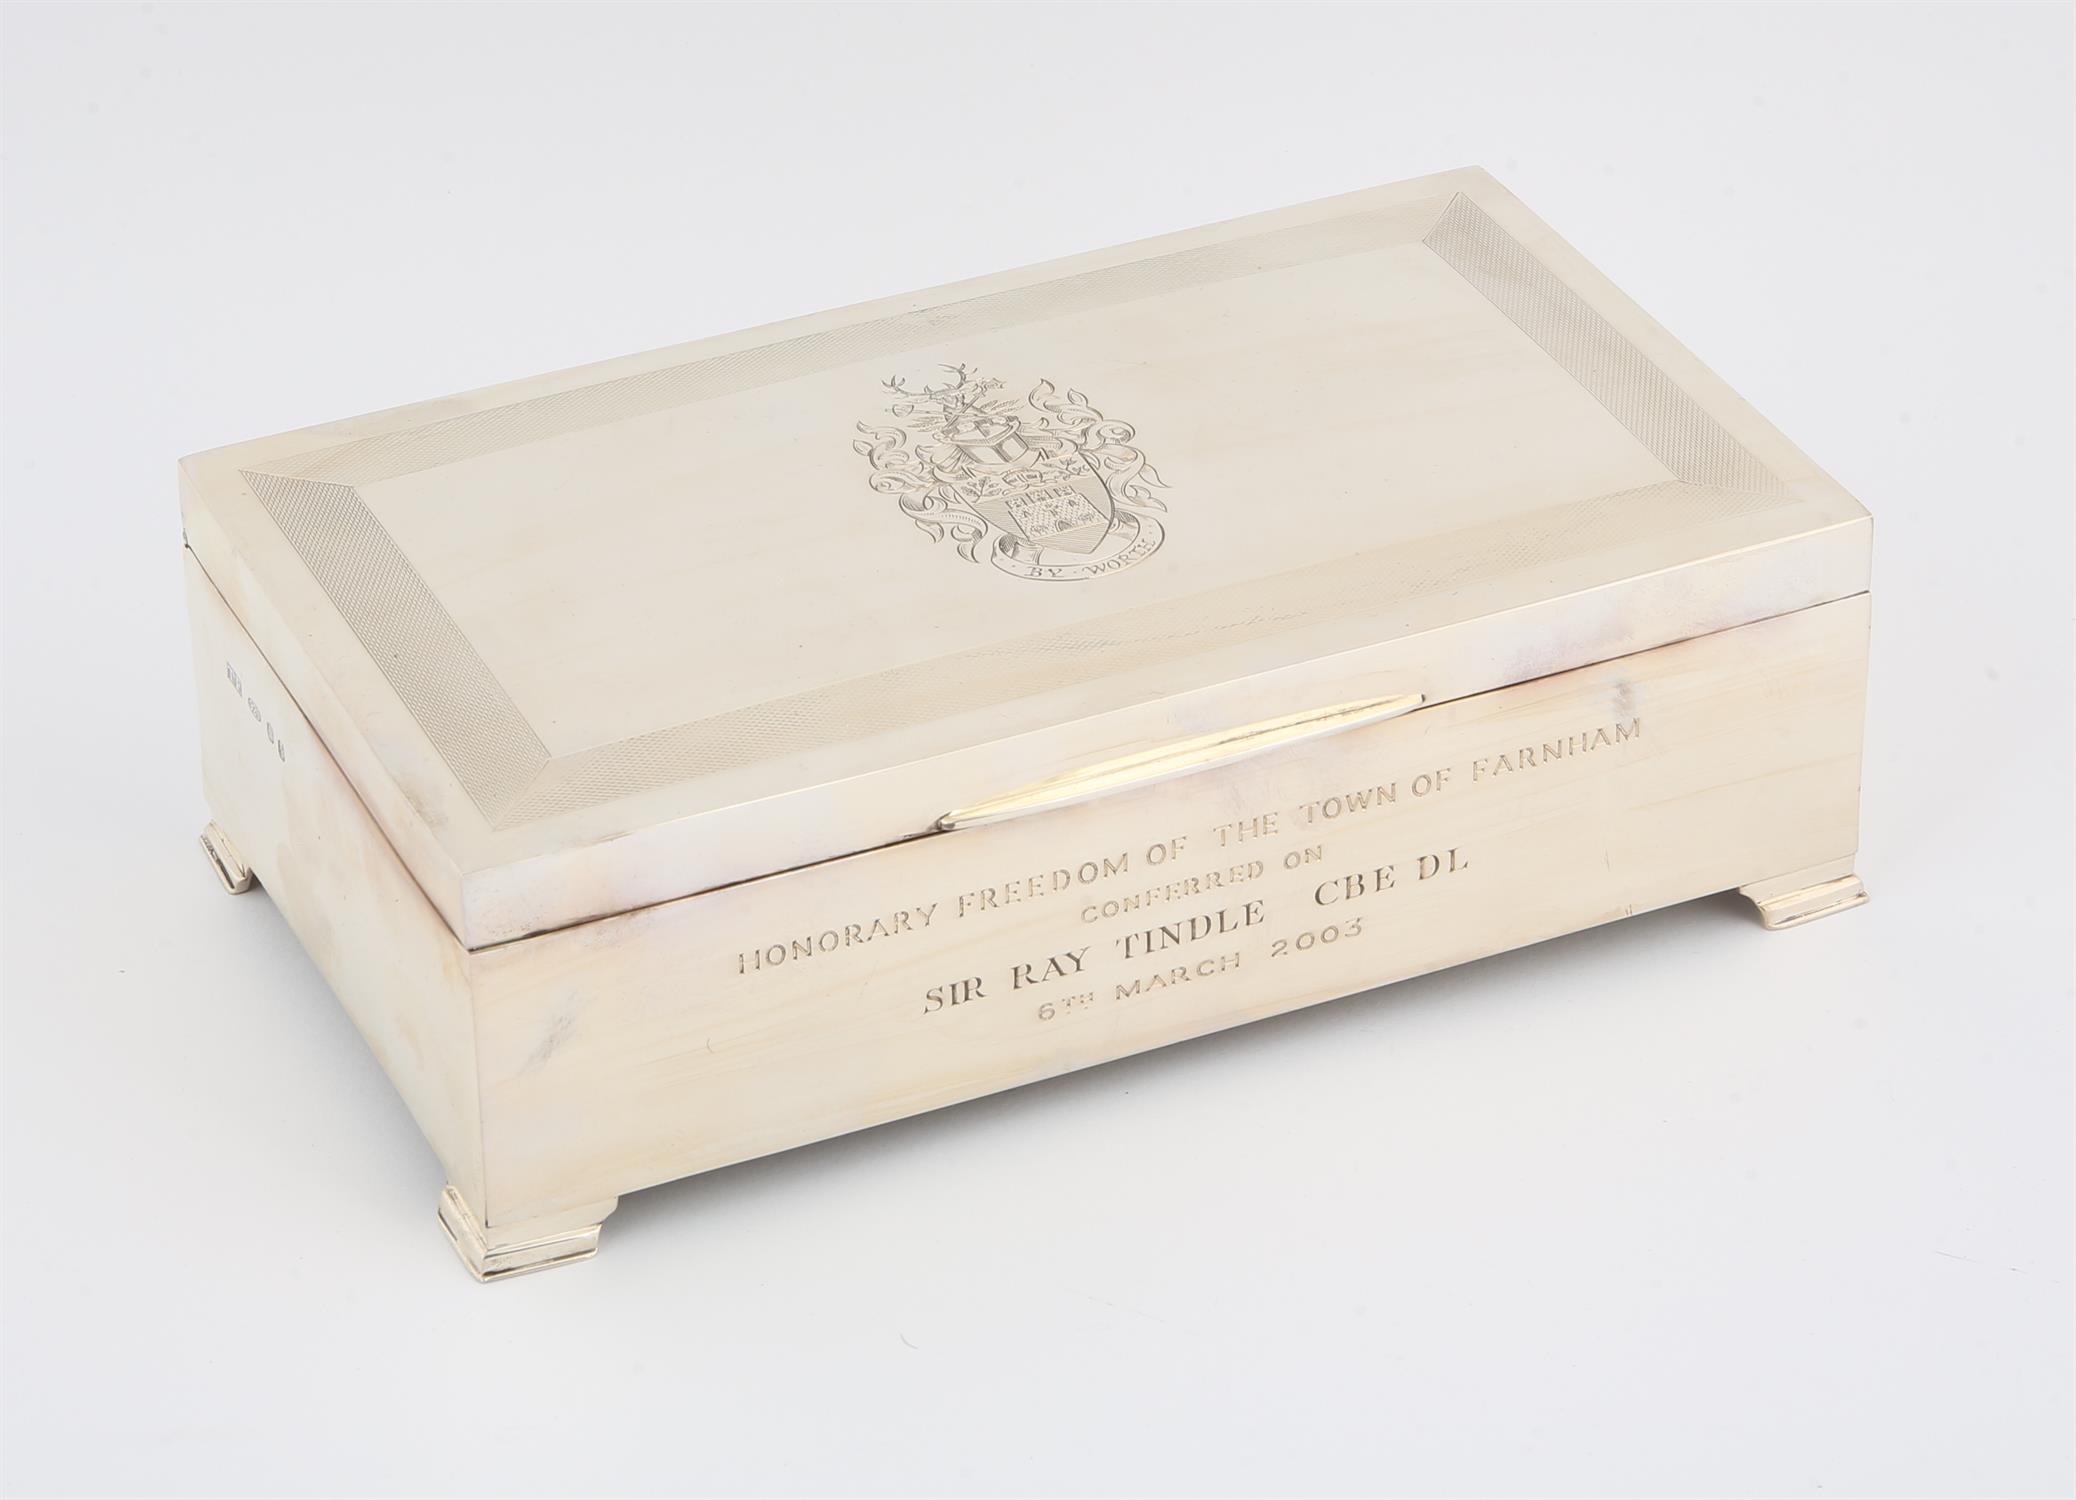 Engine turned silver box with coat of Arms and inscription, " Honorary freedom of the town of